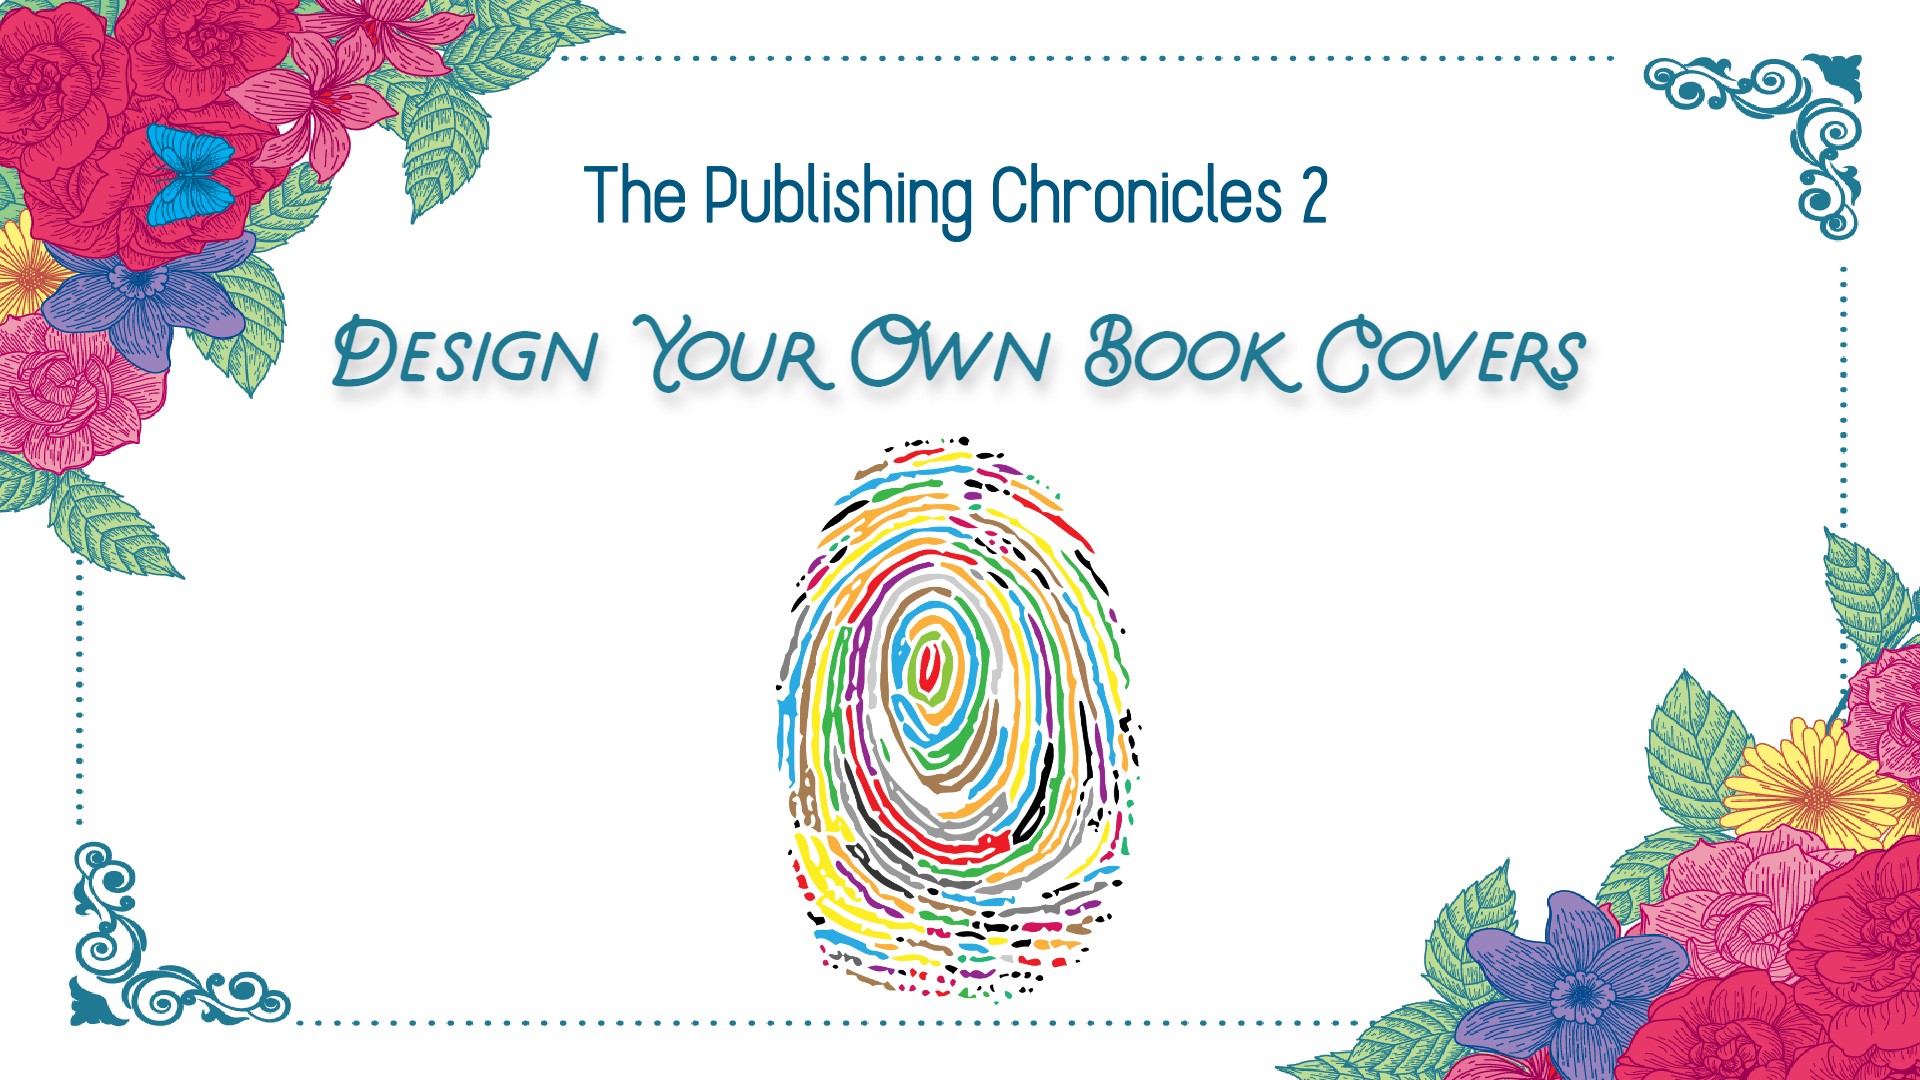 The Publishing Chronicles 2: Design Your Own Book Covers